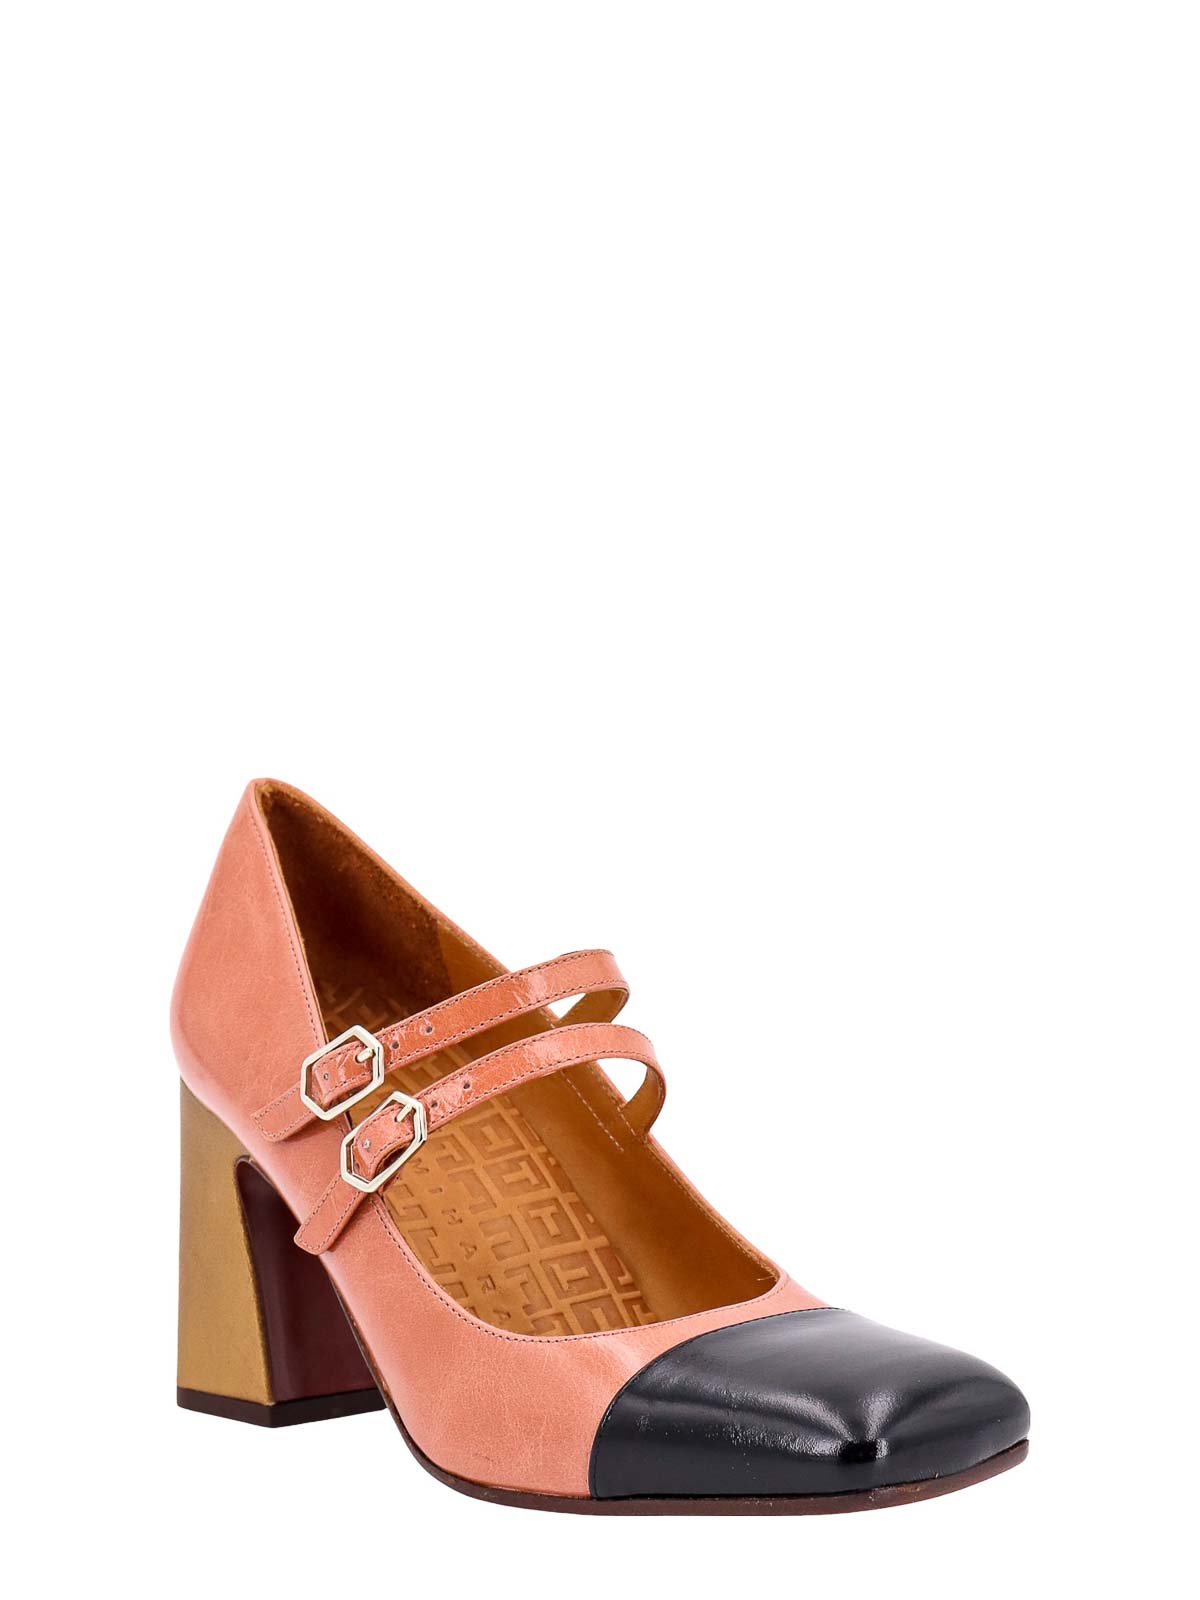 Shop Chie Mihara Patent Leather Dcollet In Orange